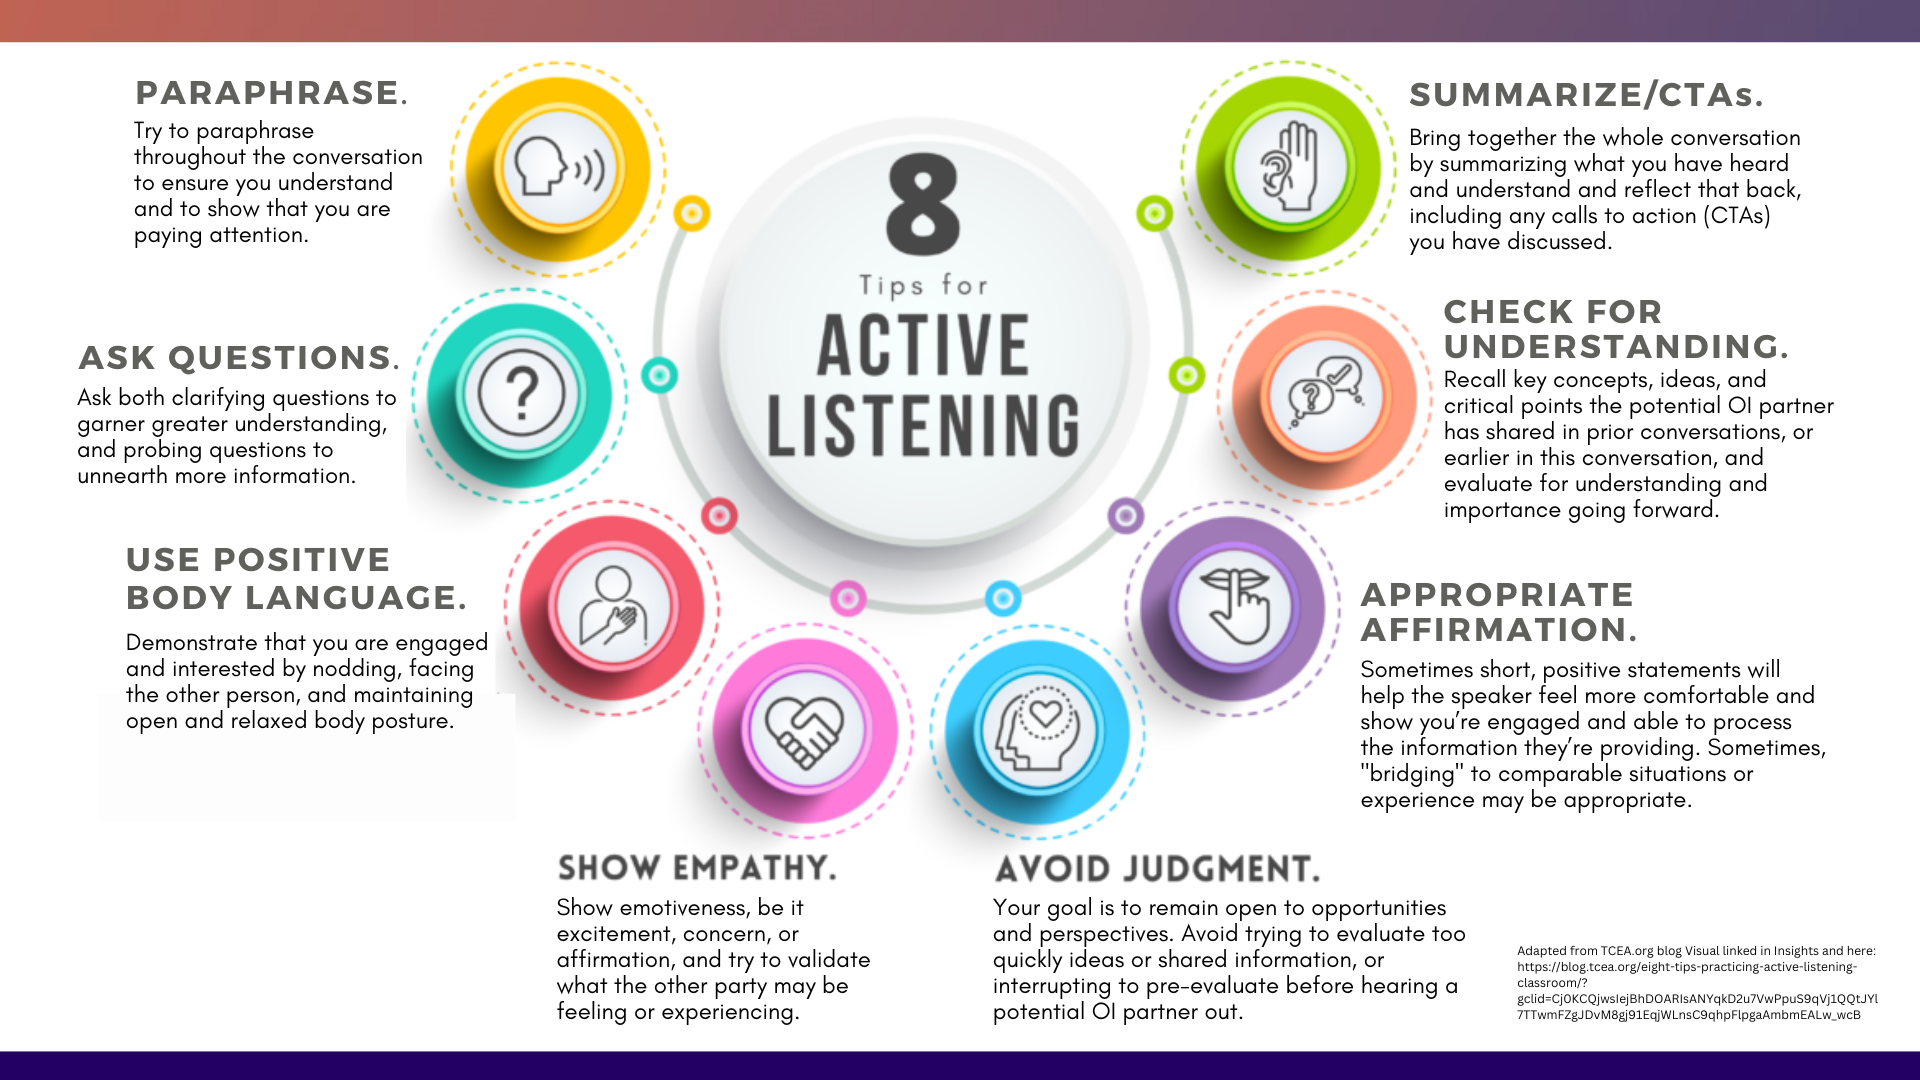 8 Skills and Tips for Active Listening Adapted TCEA